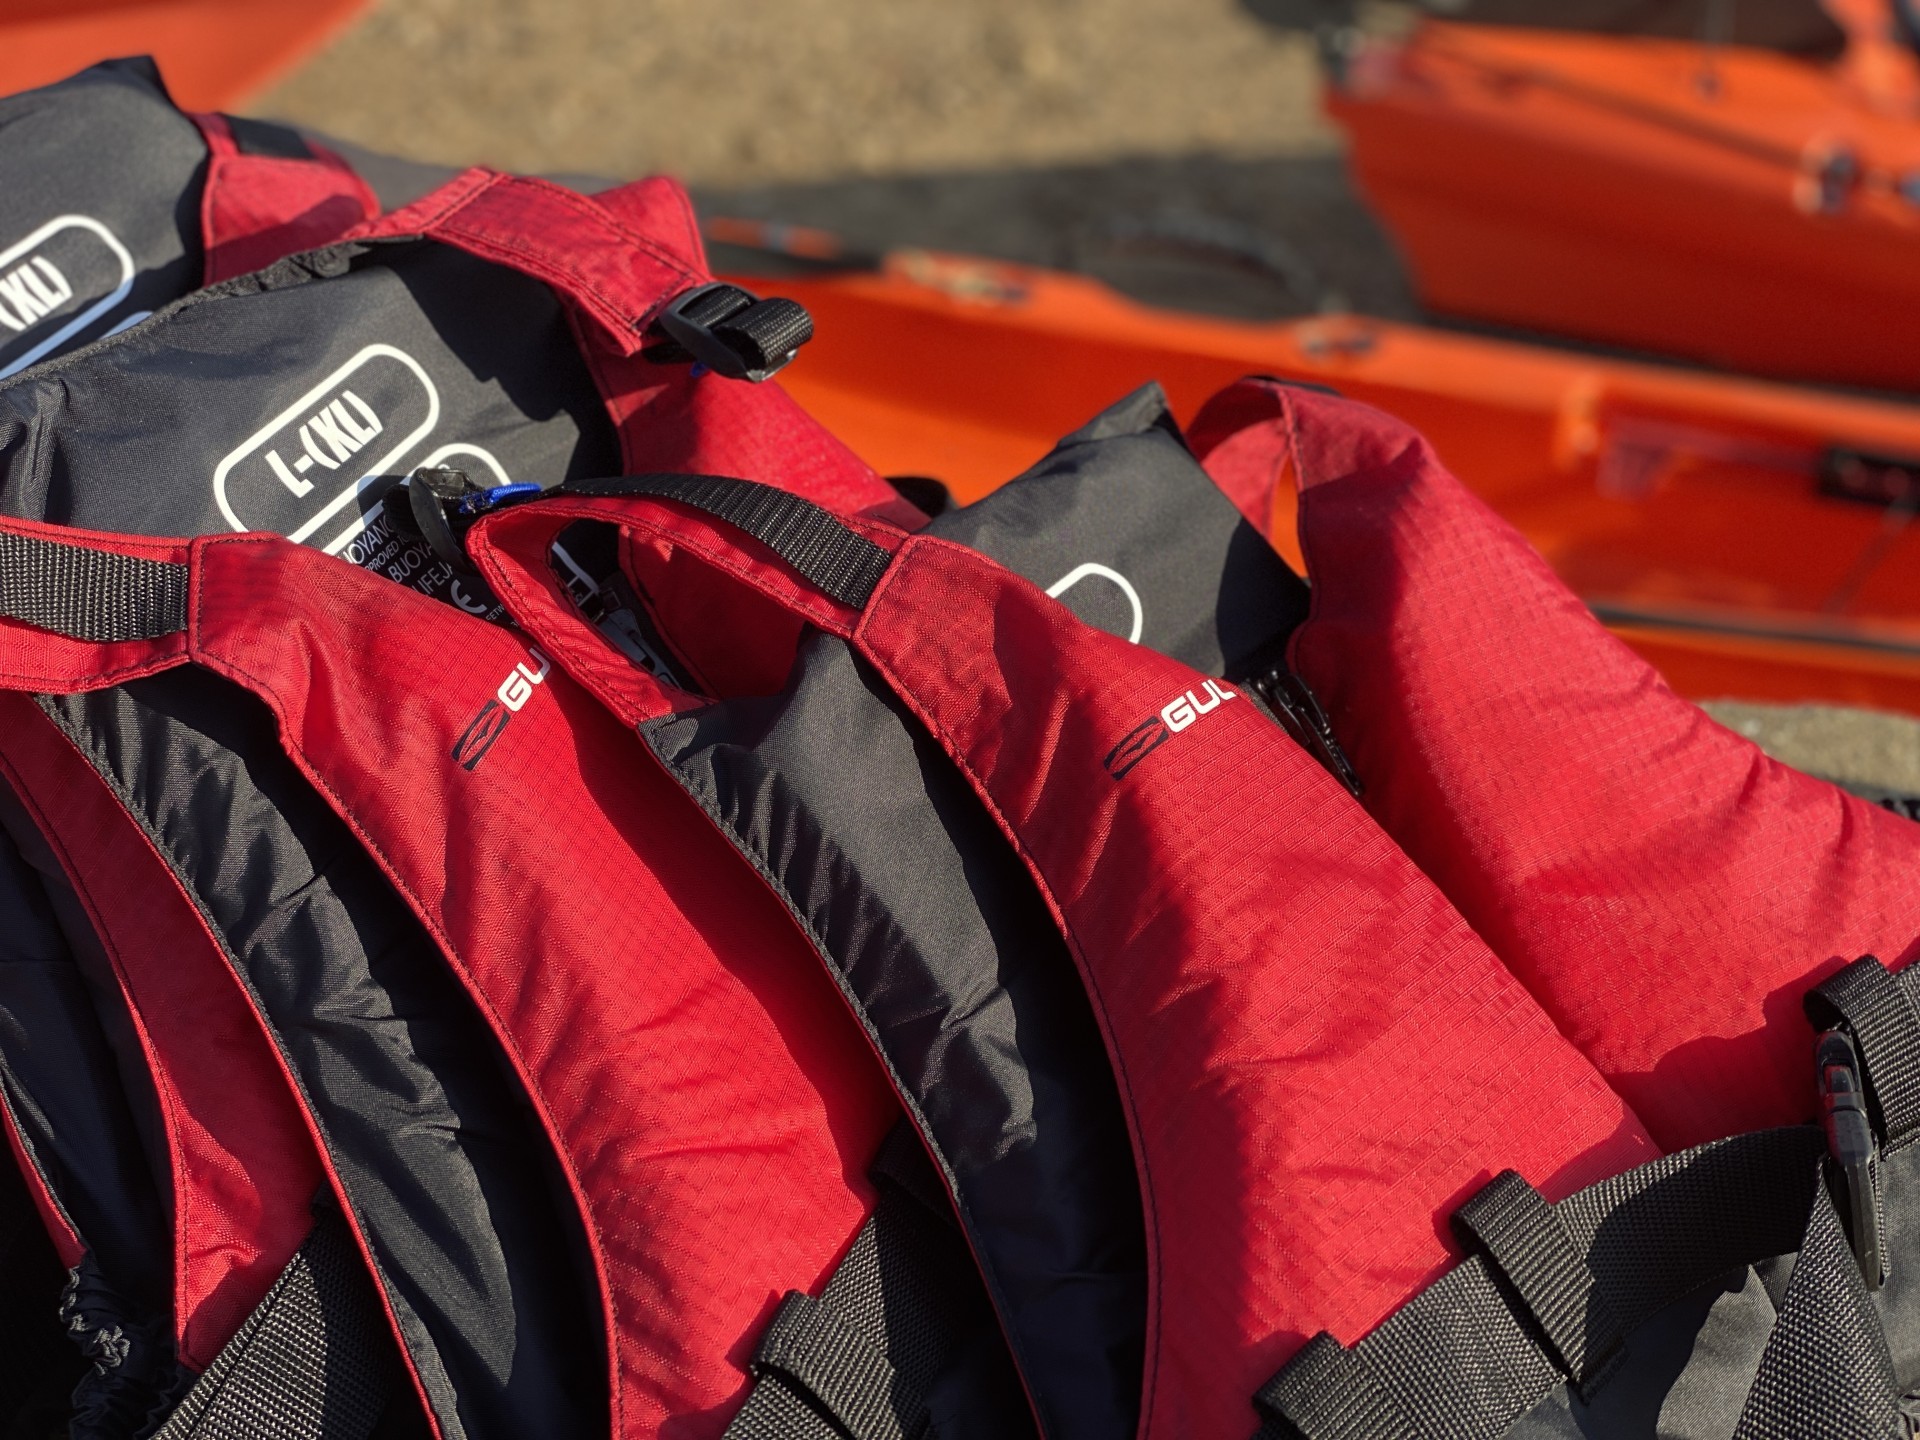 Red buoyancy aids stacked ready for use.